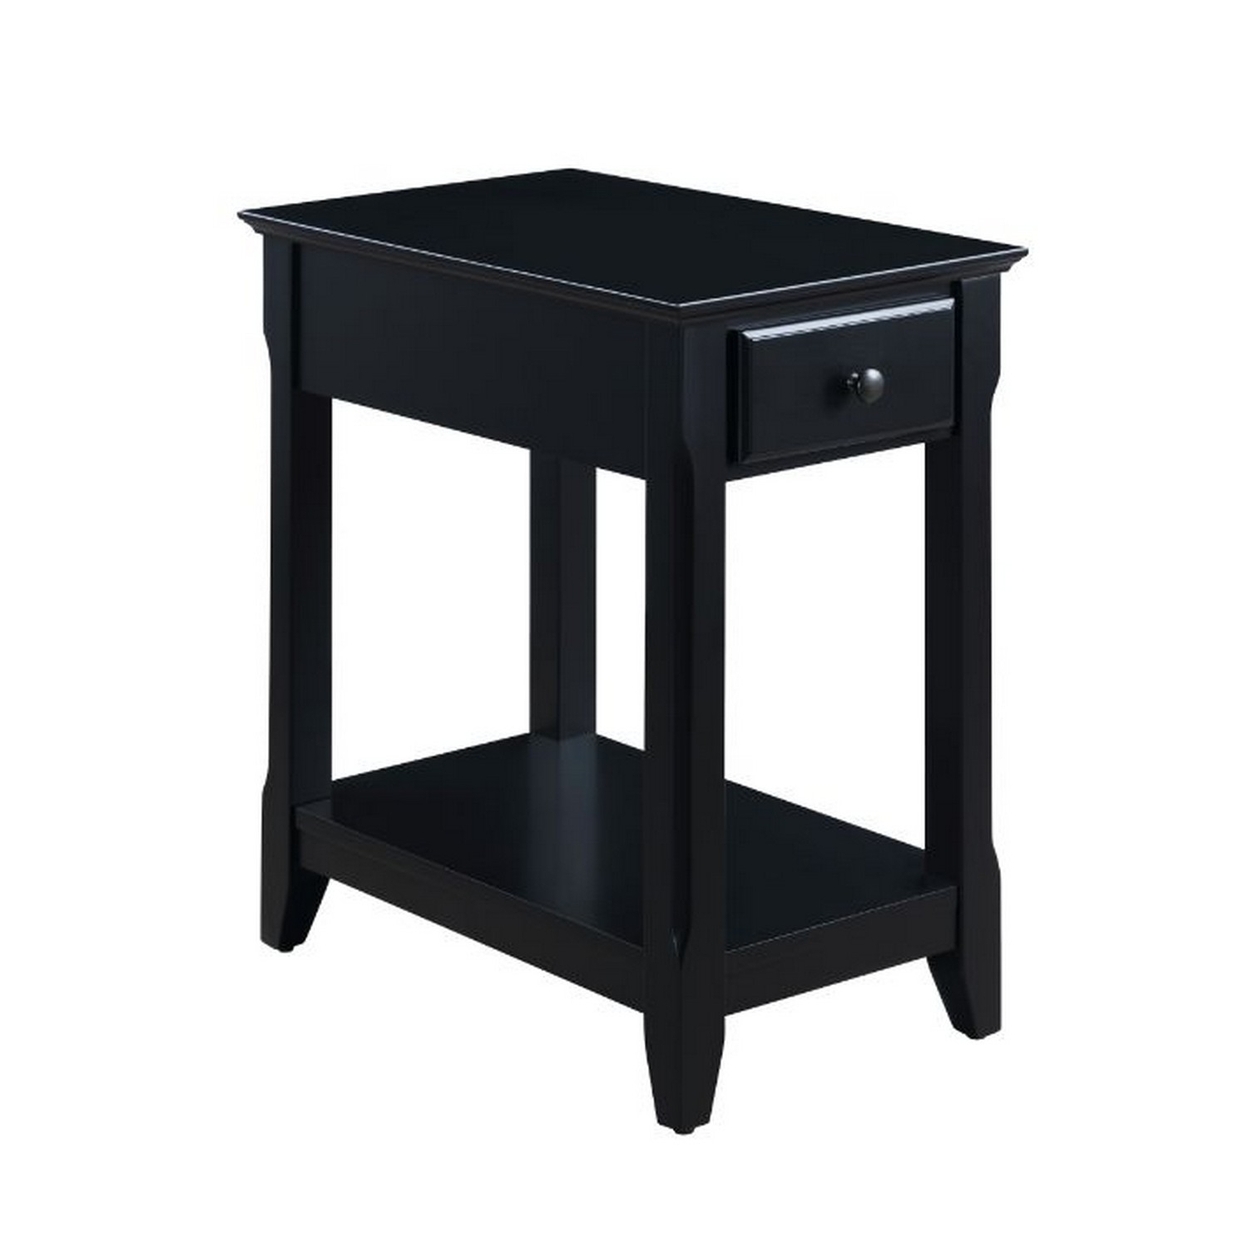 Accent Table With 1 Drawer And Bottom Shelf, Black- Saltoro Sherpi